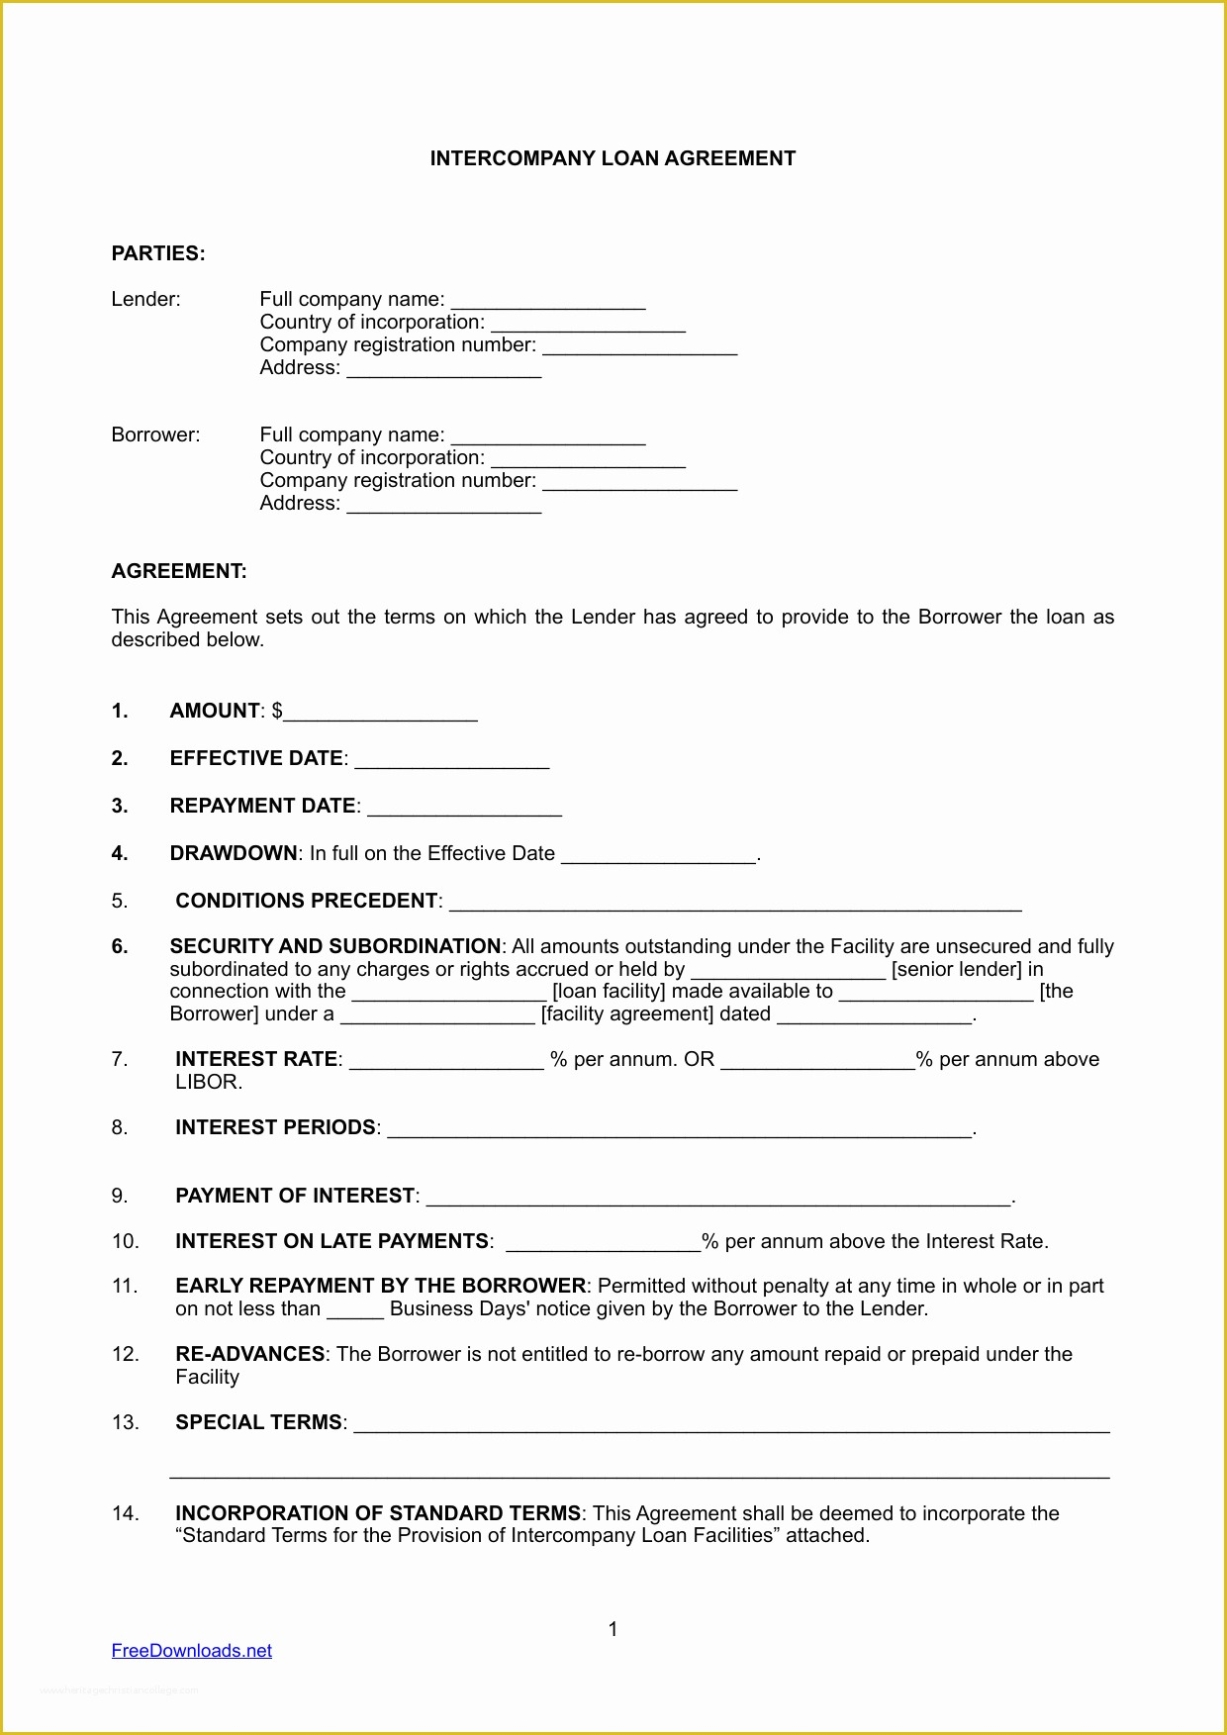 Free Loan Agreement Template Of Download Inter Pany Loan Agreement Throughout Legal Contract Template For Borrowing Money